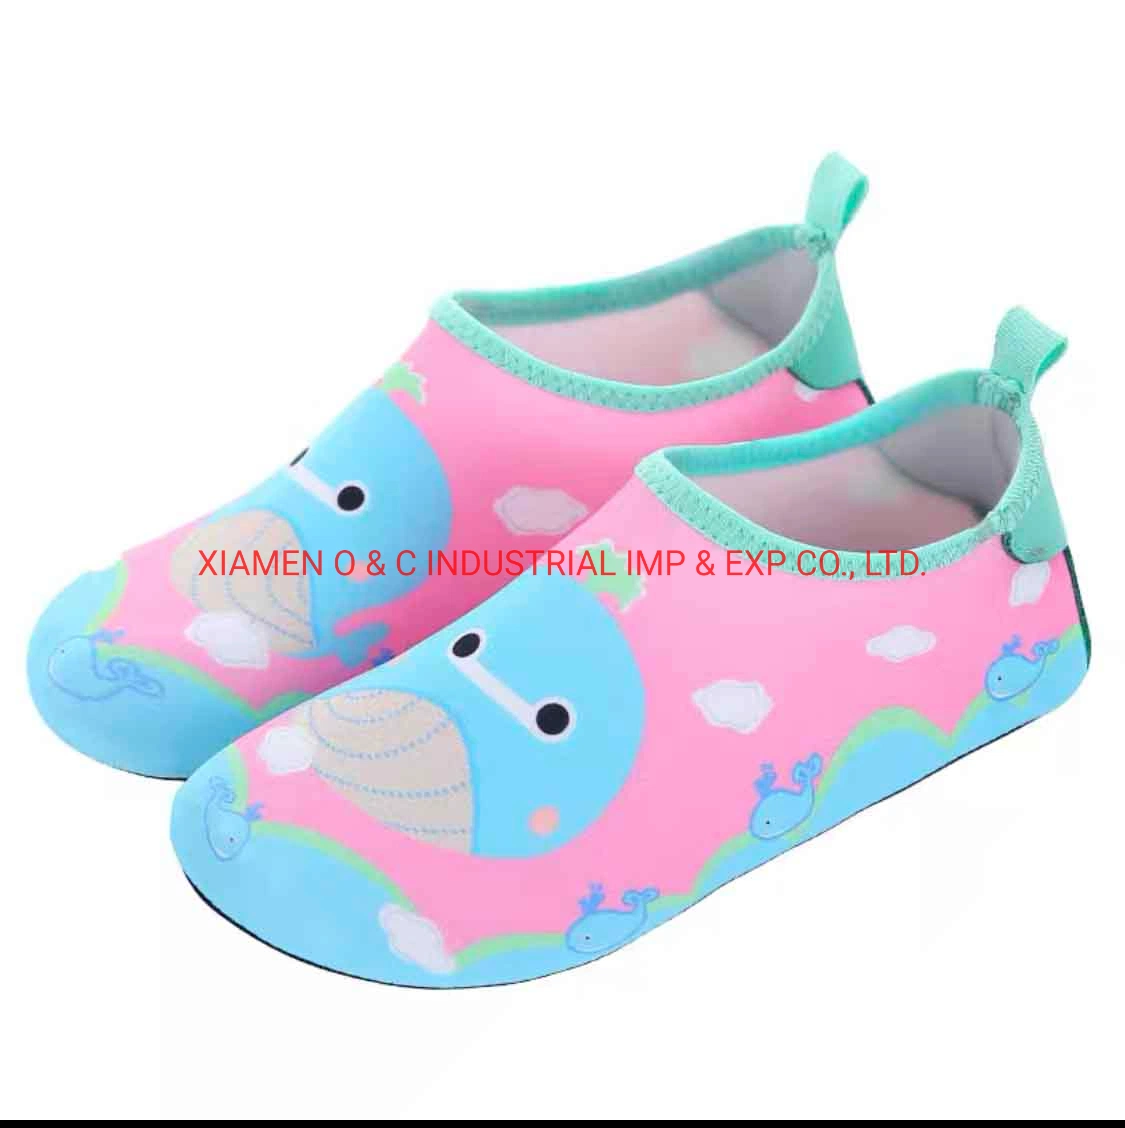 Water Shoes Barefoot Quick-Dry Children Outdoor Aqua Socks Shoe Slippers Baby Boys Girls Diving Wading Beach Swimming Shoes Kids